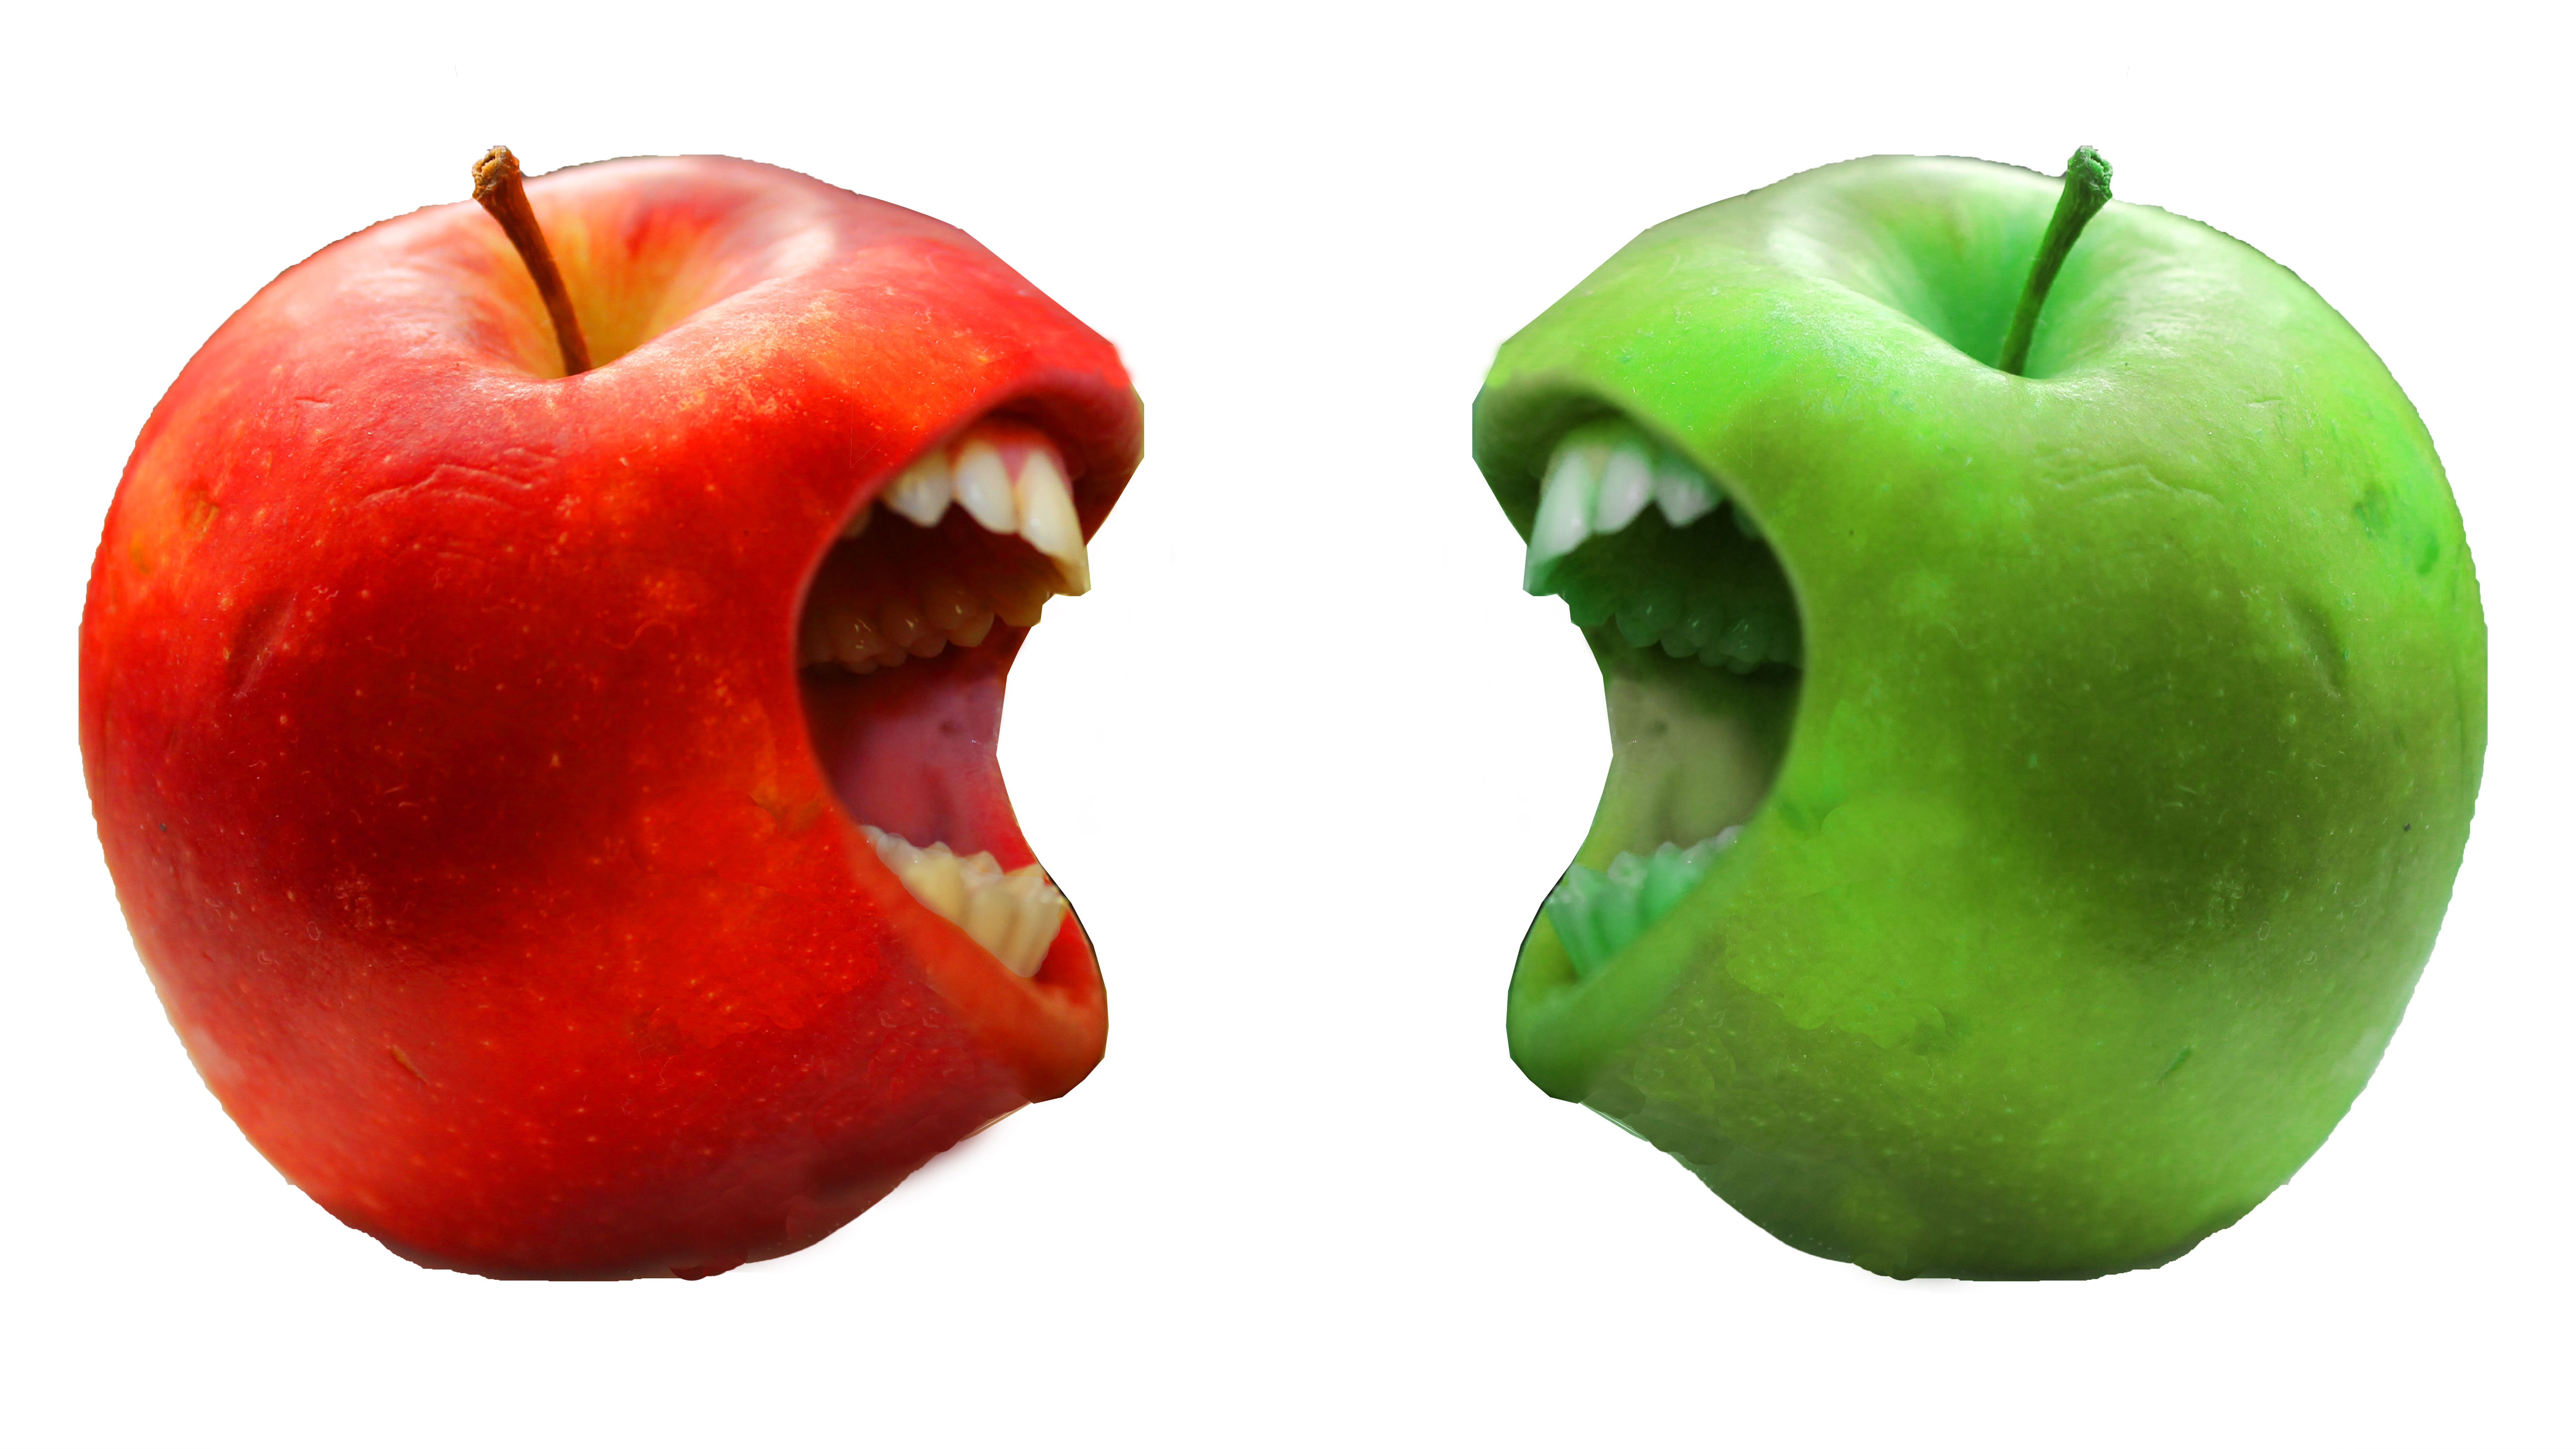 Red Apples Vs Green Apples - HD Photos Gallery